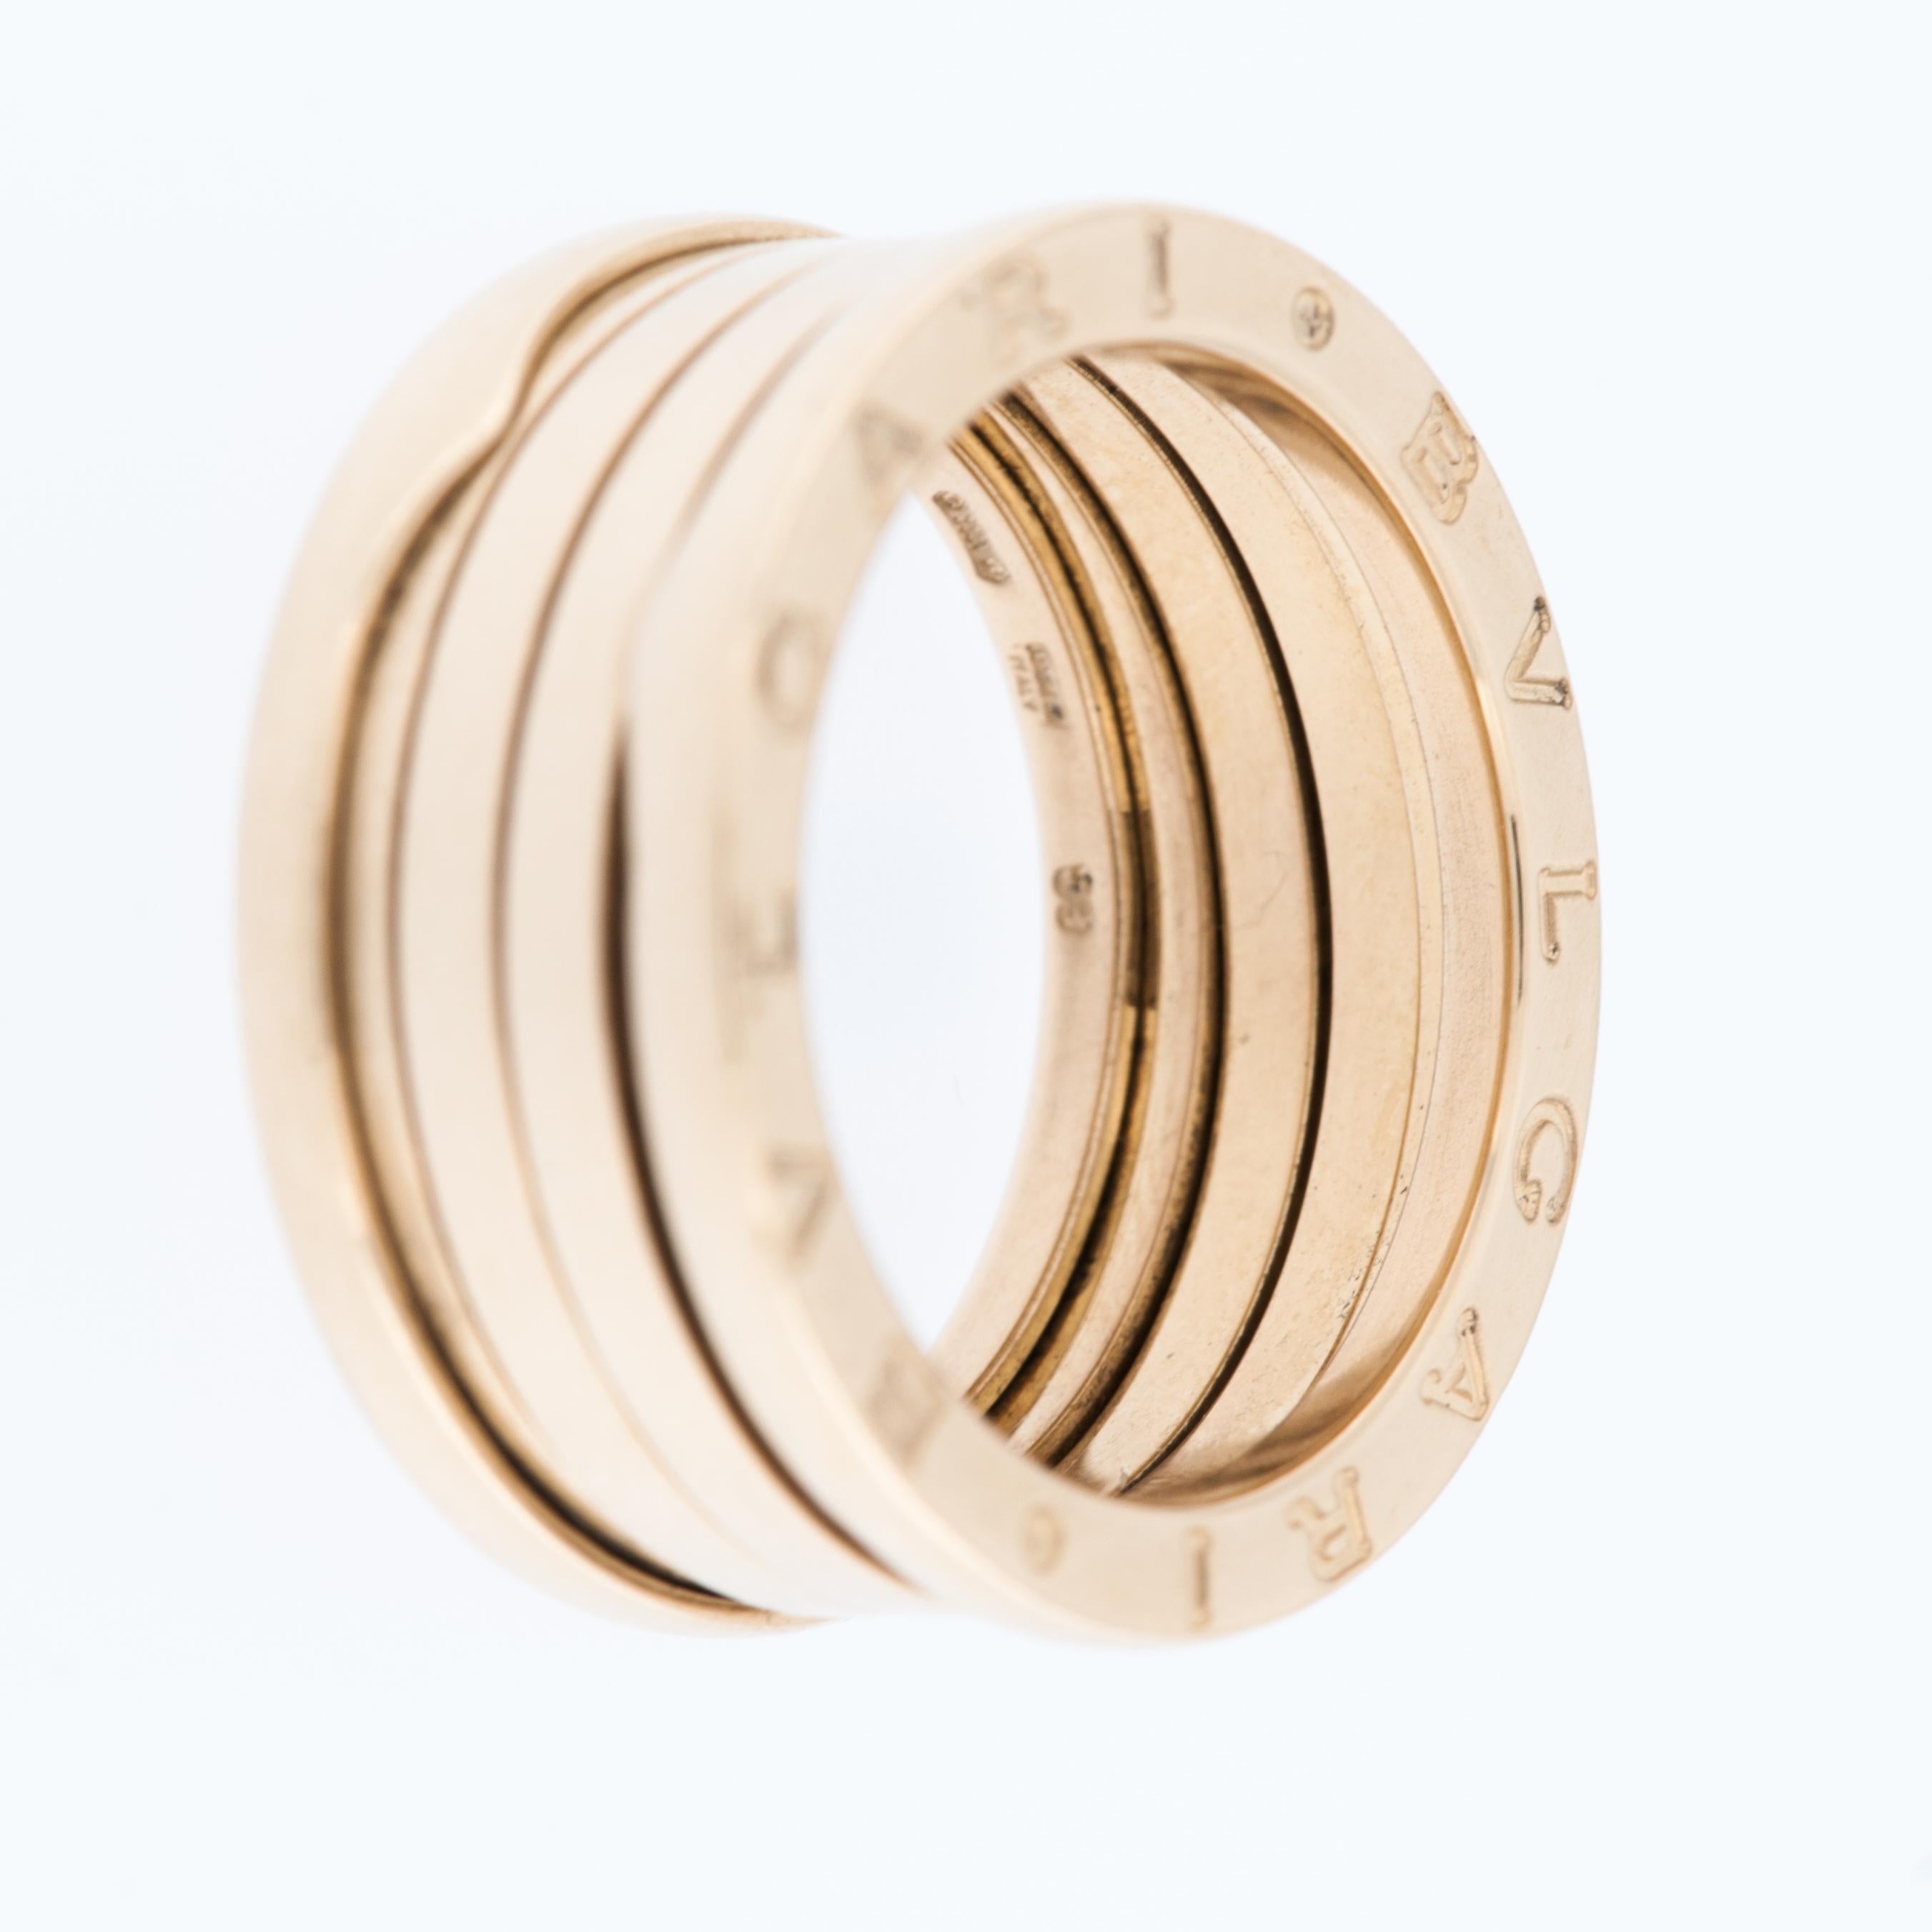 Inspired by the monumental Colosseum The Bulgari B.Zero 1 Ring in 18-karat yellow gold with 3 rows is a striking and iconic piece of jewelry from the renowned Italian luxury brand Bulgari. Known for its bold and contemporary designs, the B.Zero 1